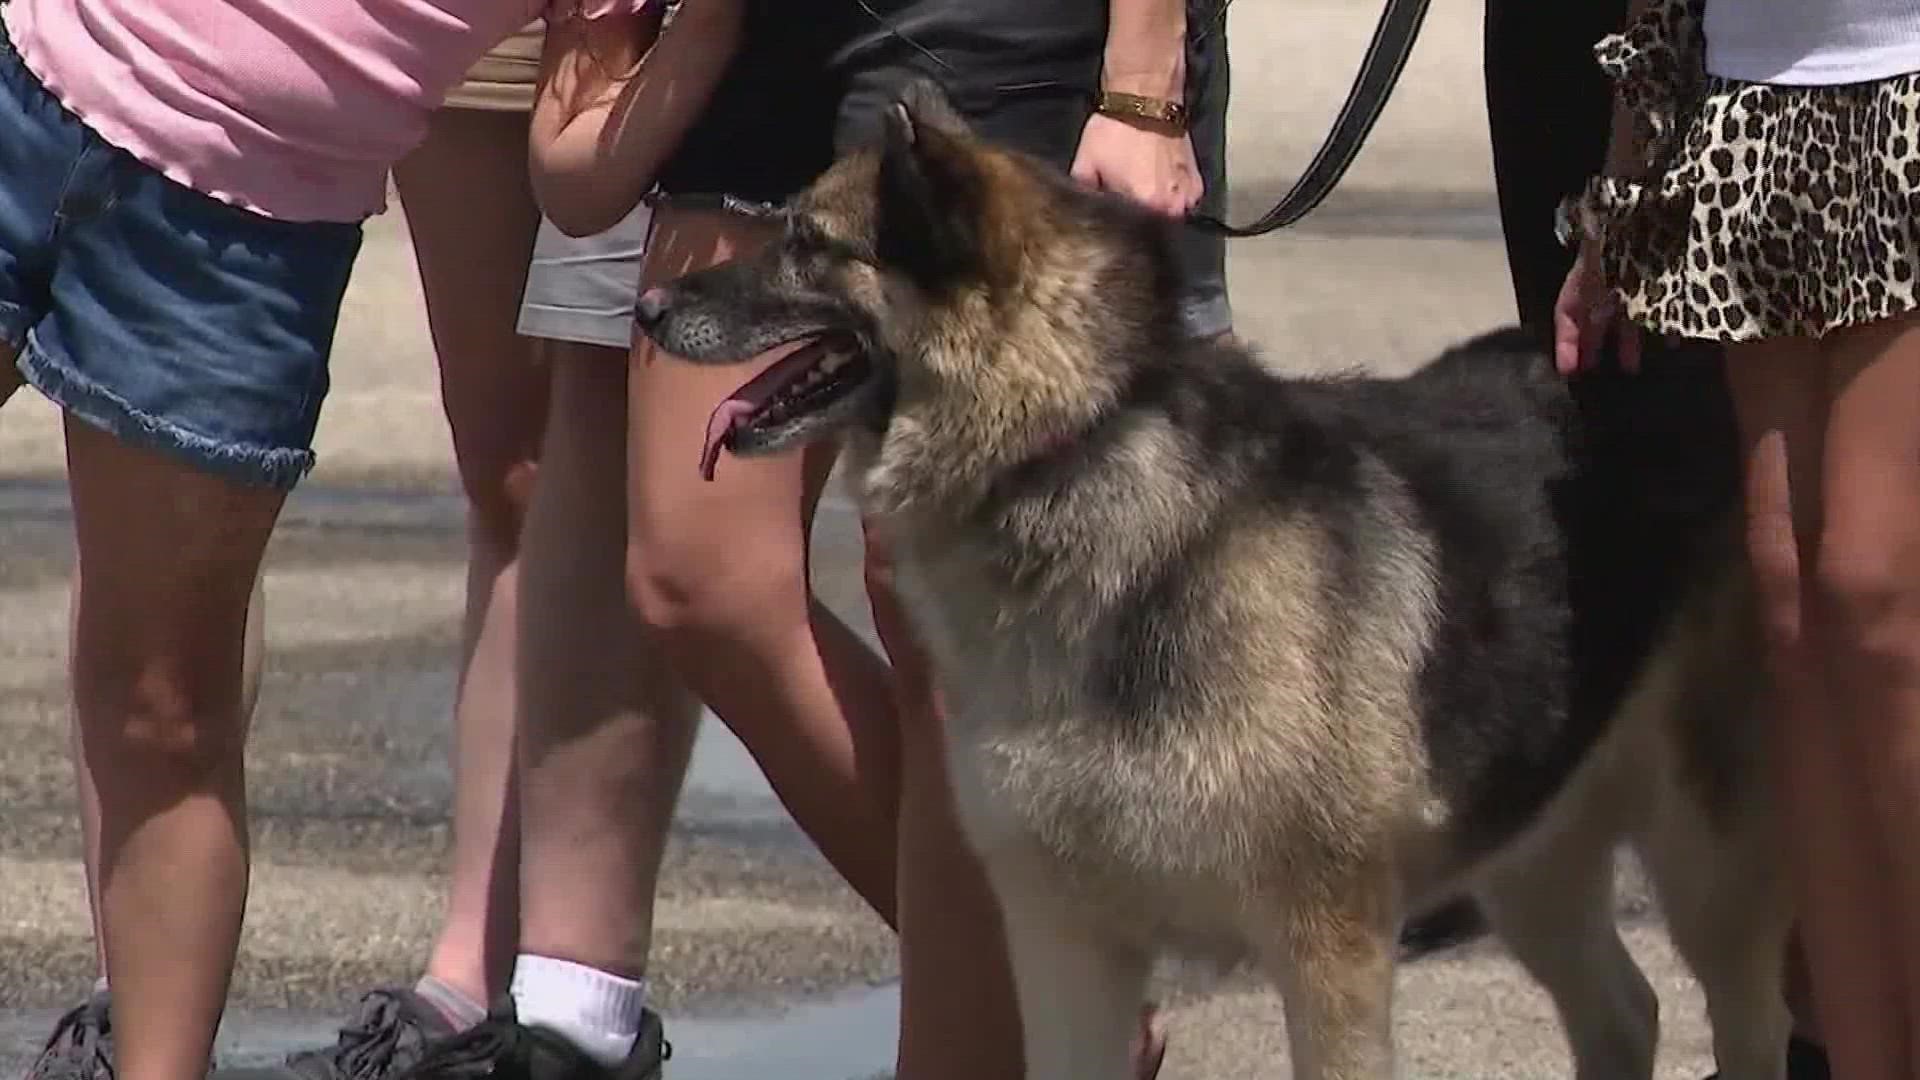 The dog, named Sheba, was found in the city of Borger more than 600 miles away in the Texas panhandle.